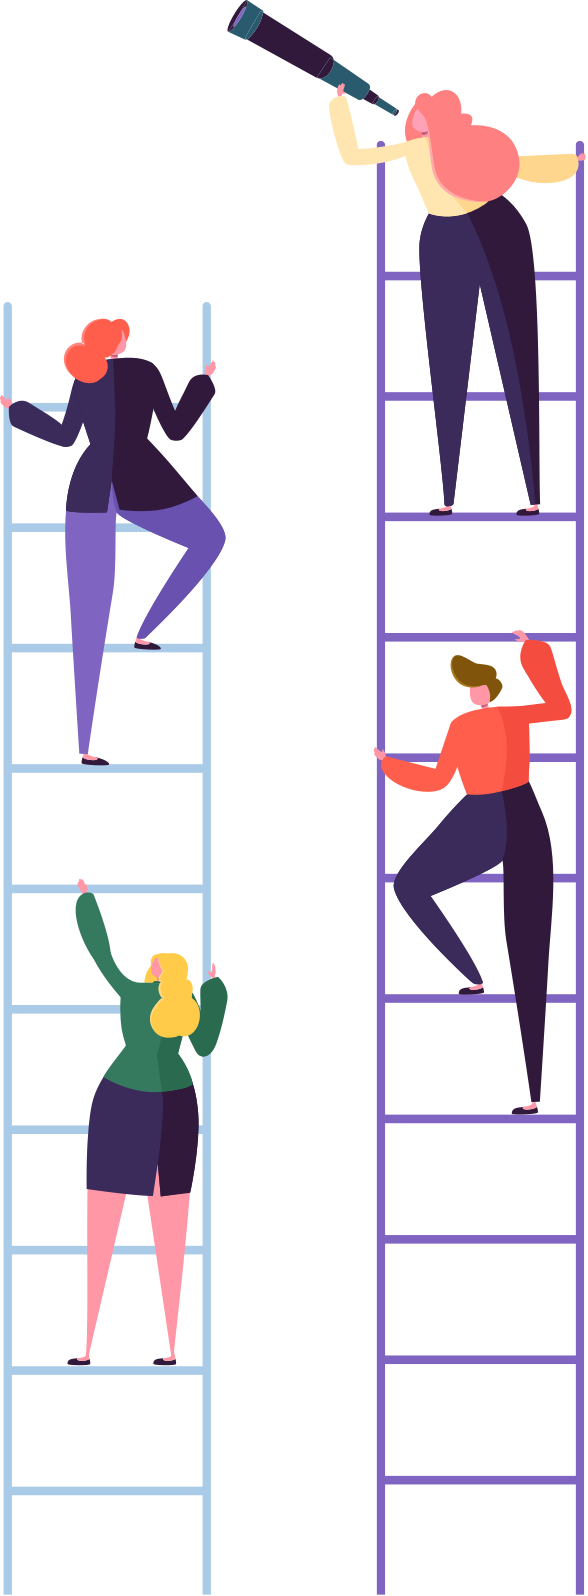 Illustration of man and woman climbing ladders.